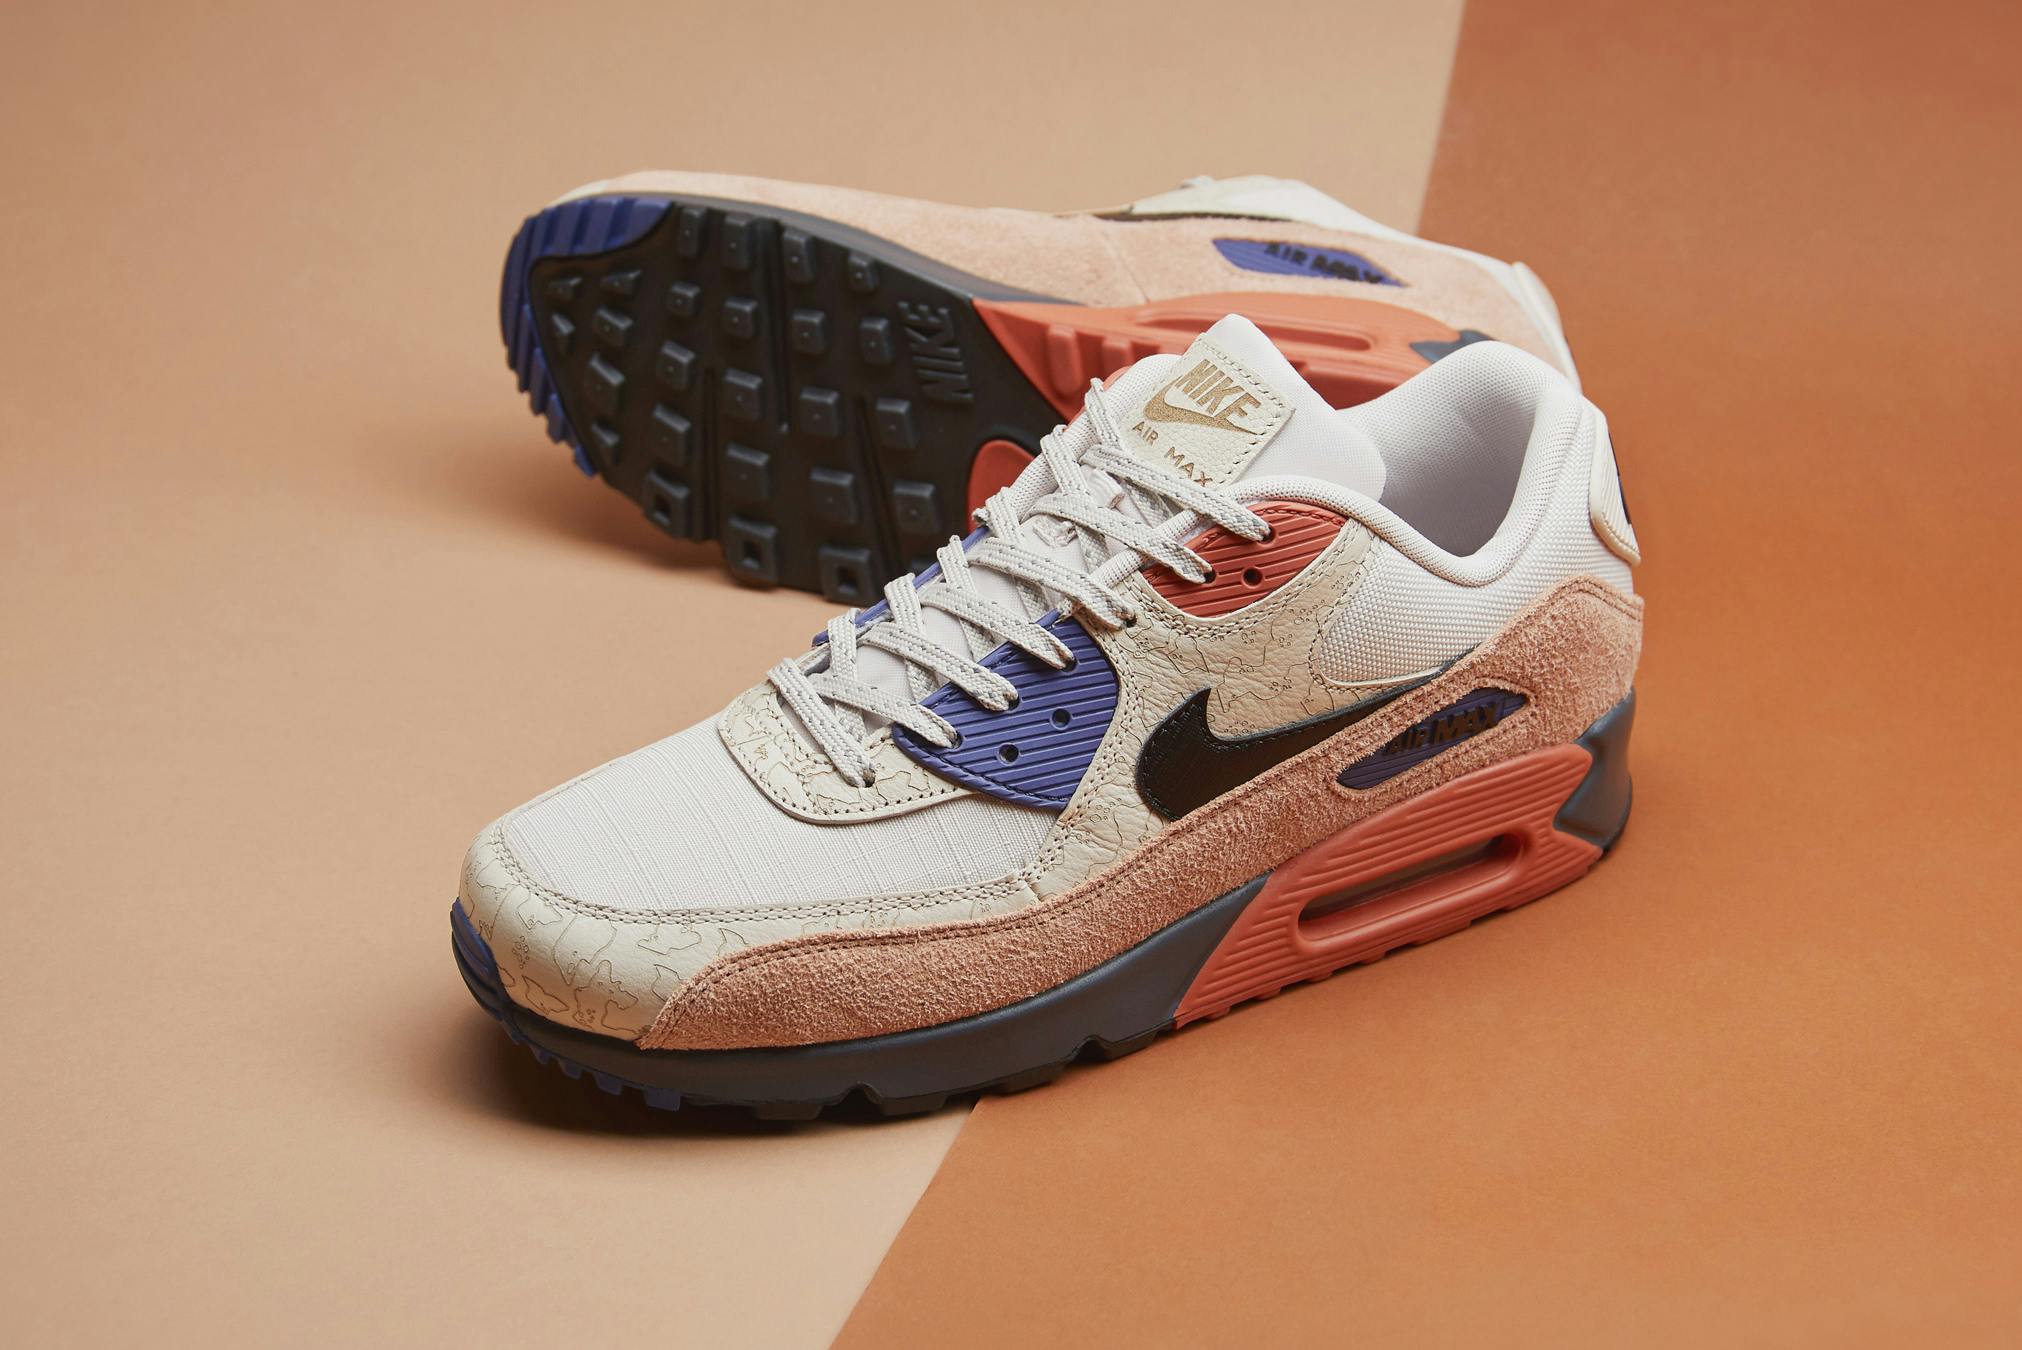 Nike Air Max 90 - Register Now on END. (DE) |